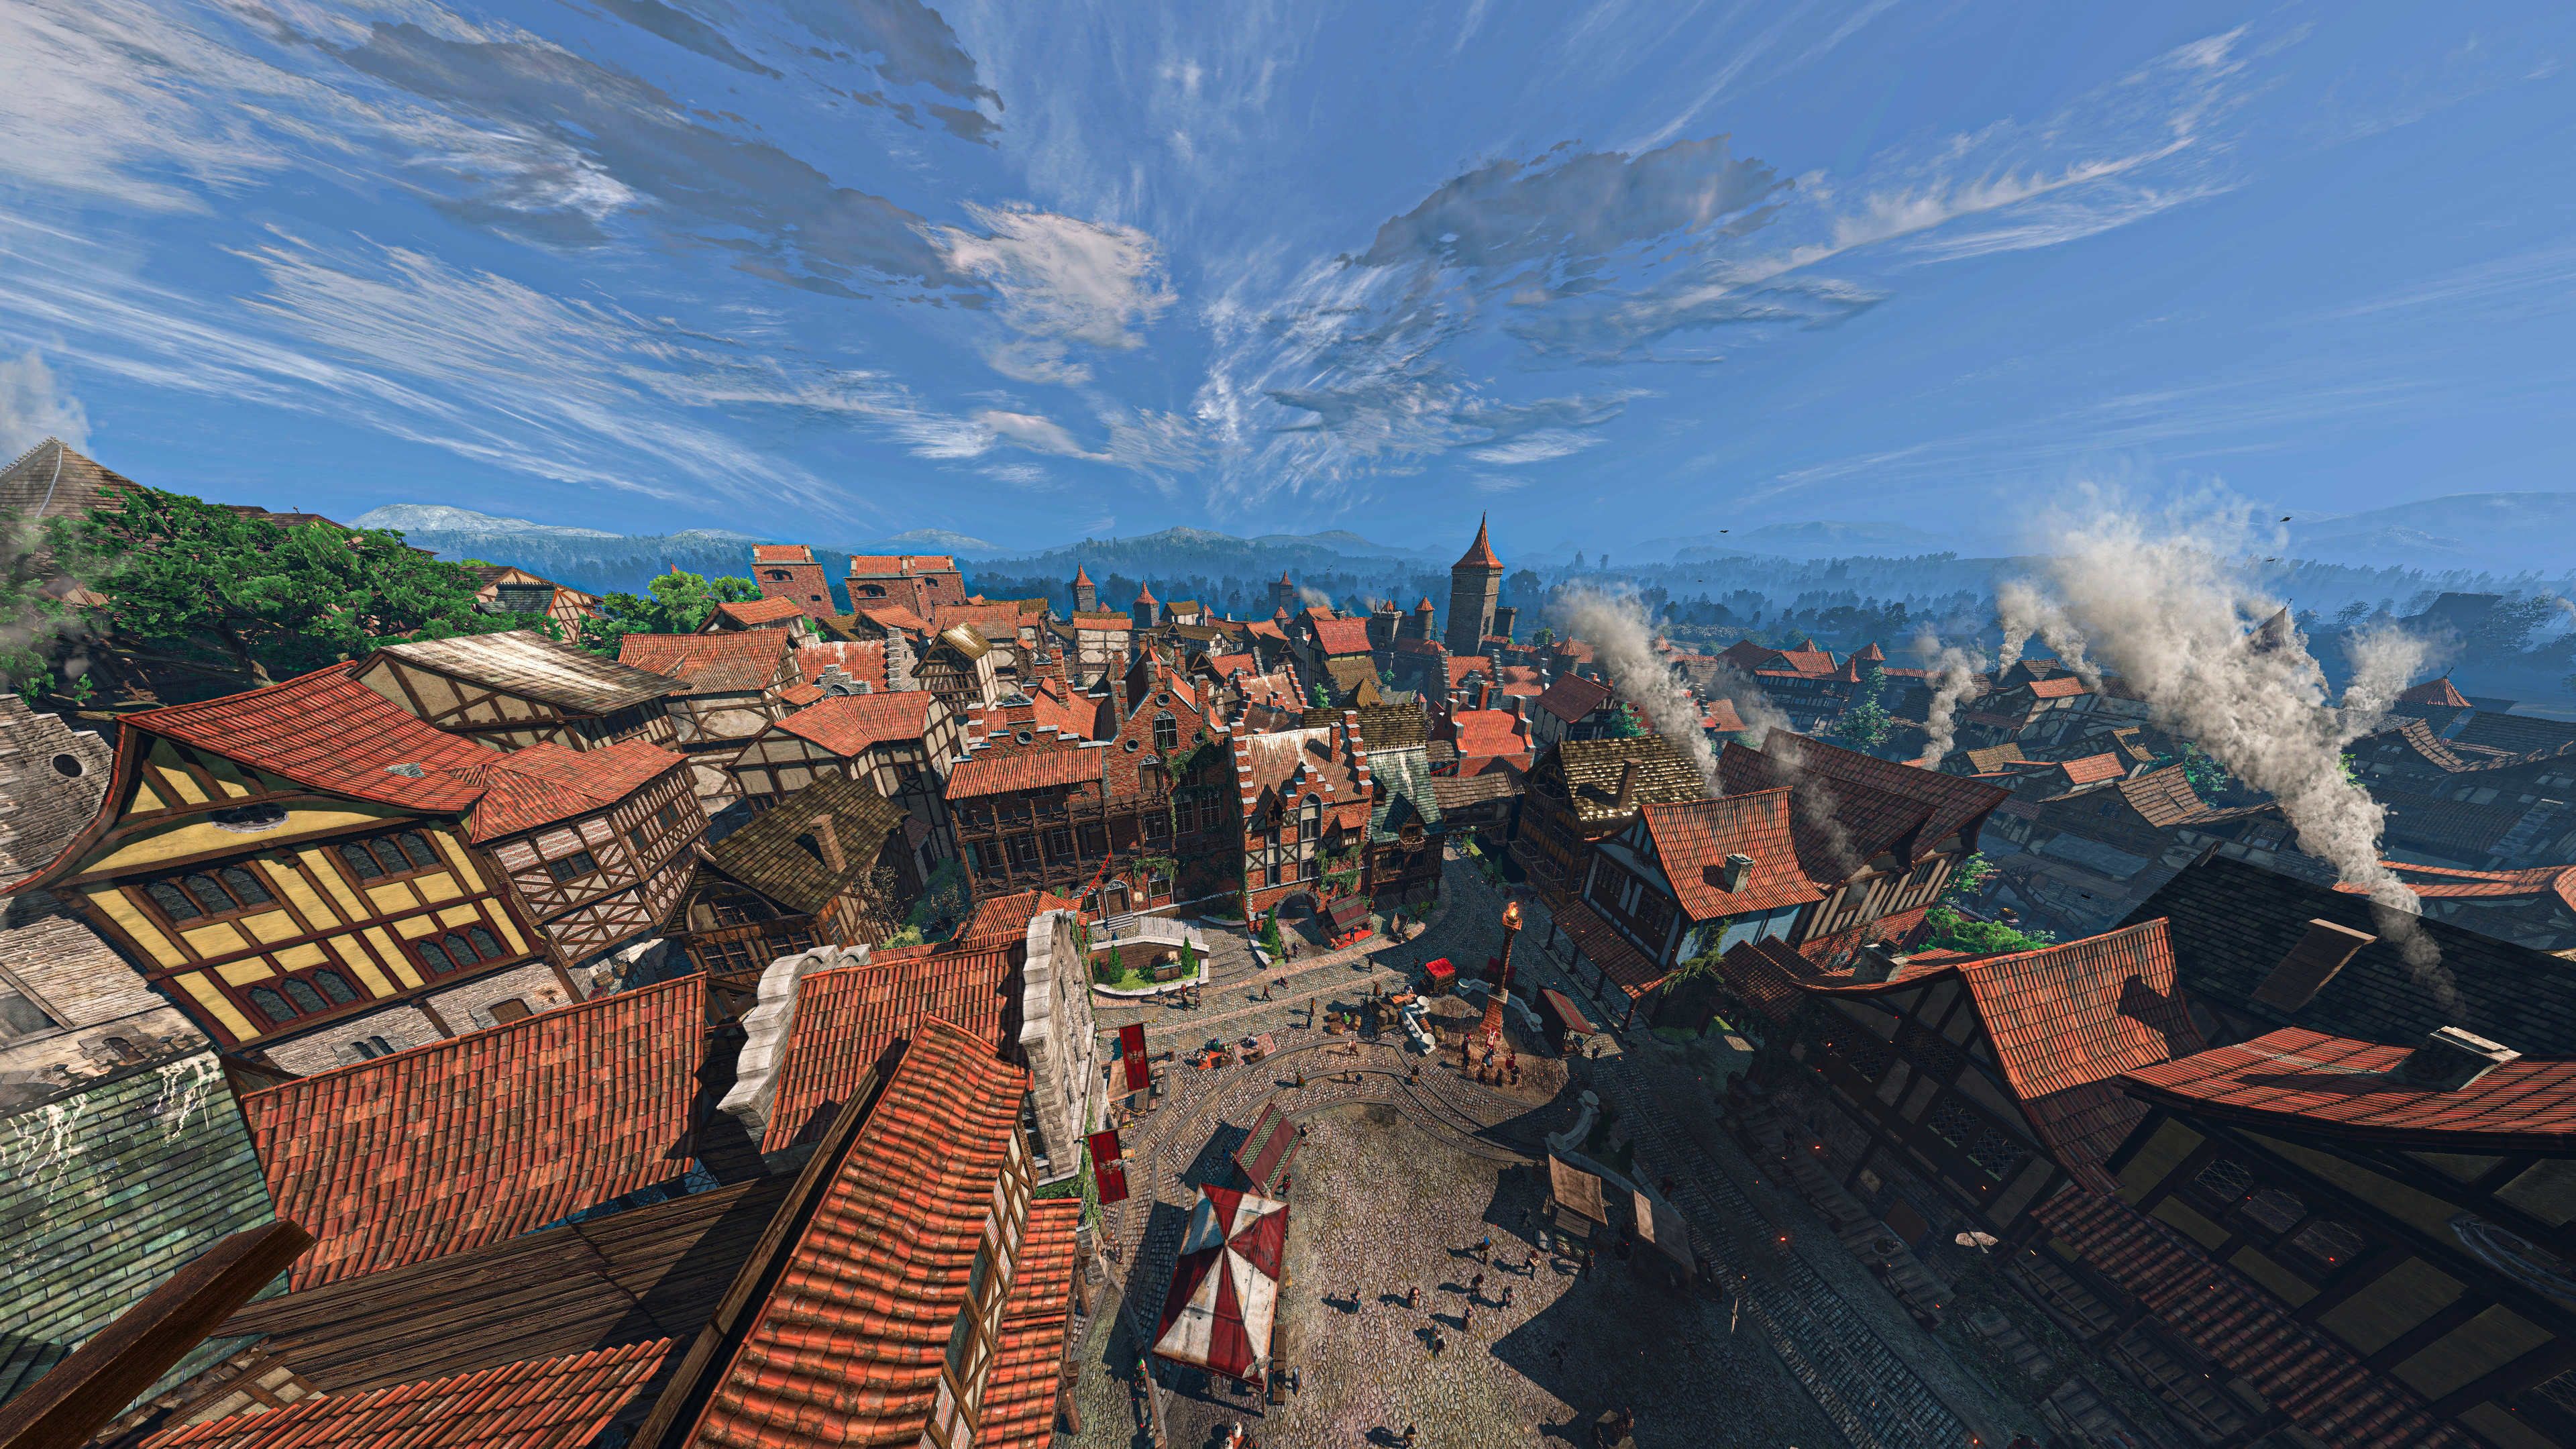 General 3840x2160 The Witcher The Witcher 3: Wild Hunt Novigrad video games rooftops